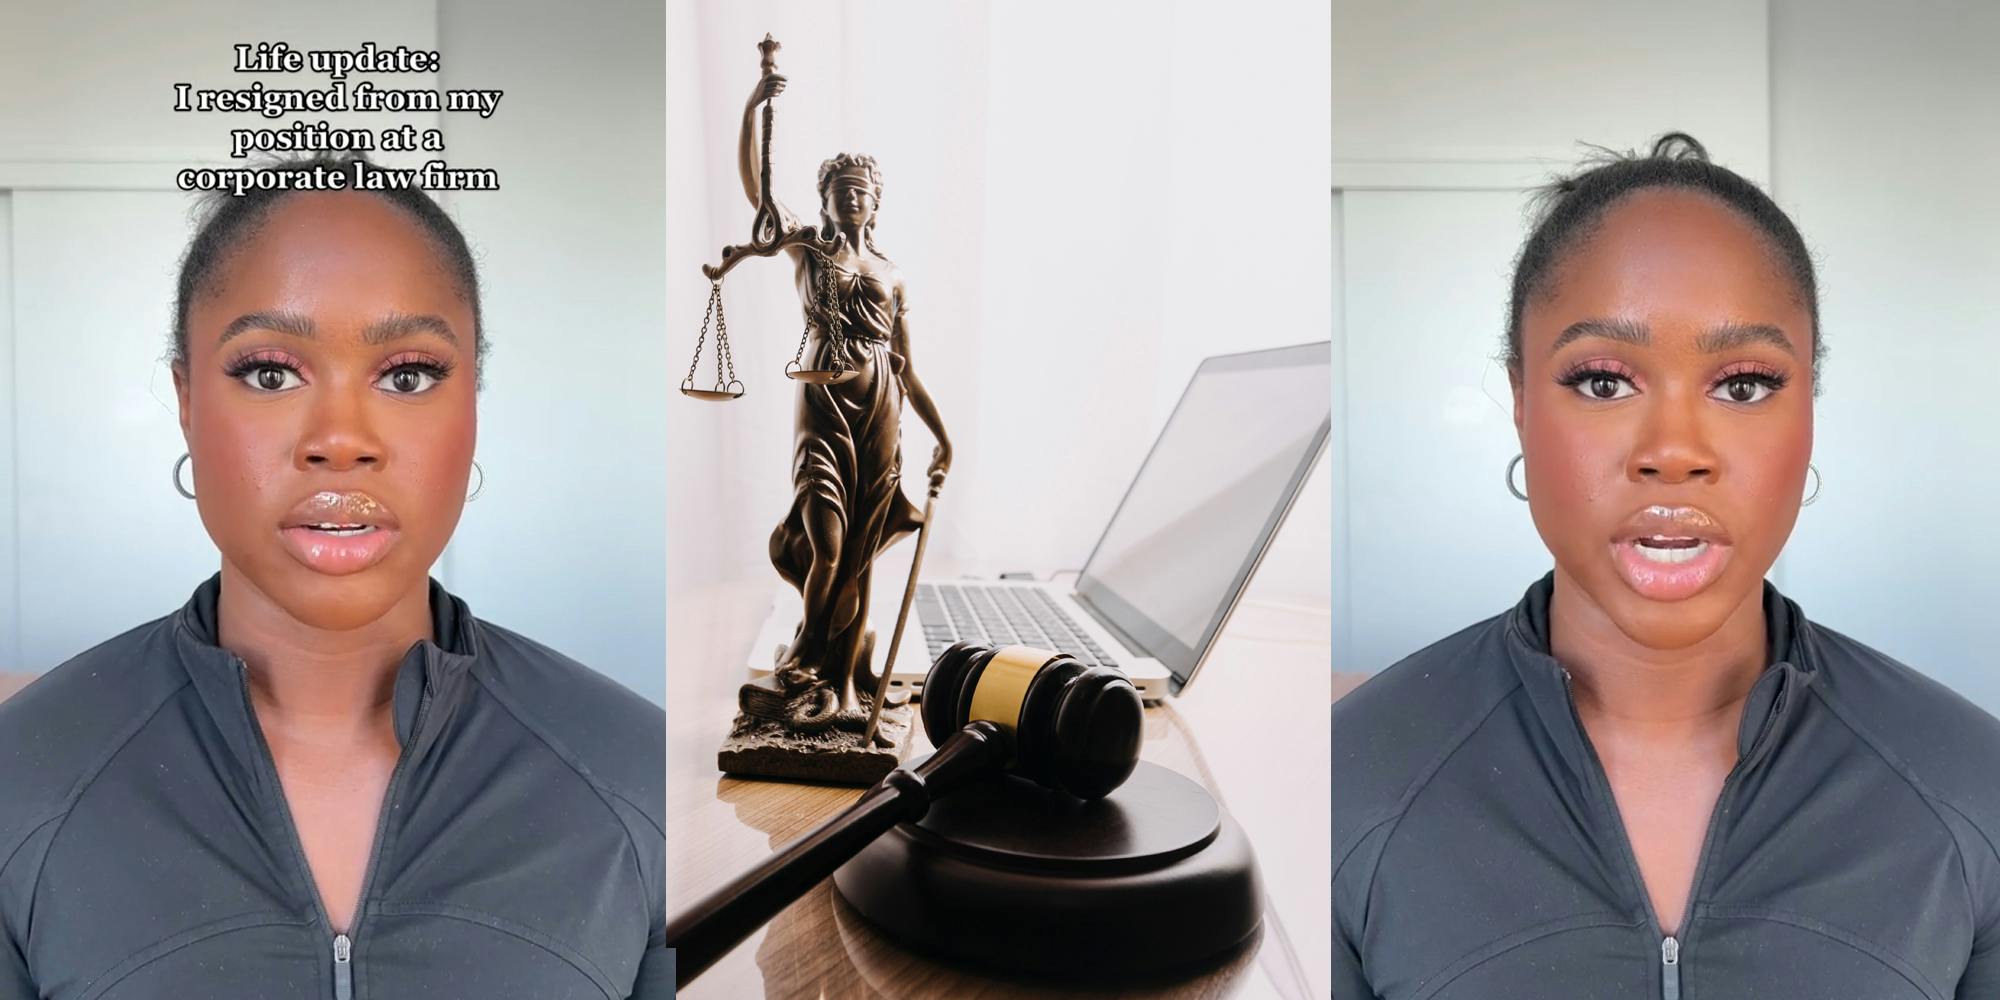 attorney speaking with caption "Life update: I resigned form my corporate law firm" (l) statue of justice with wooden gavel and laptop in office (c) attorney speaking (r)